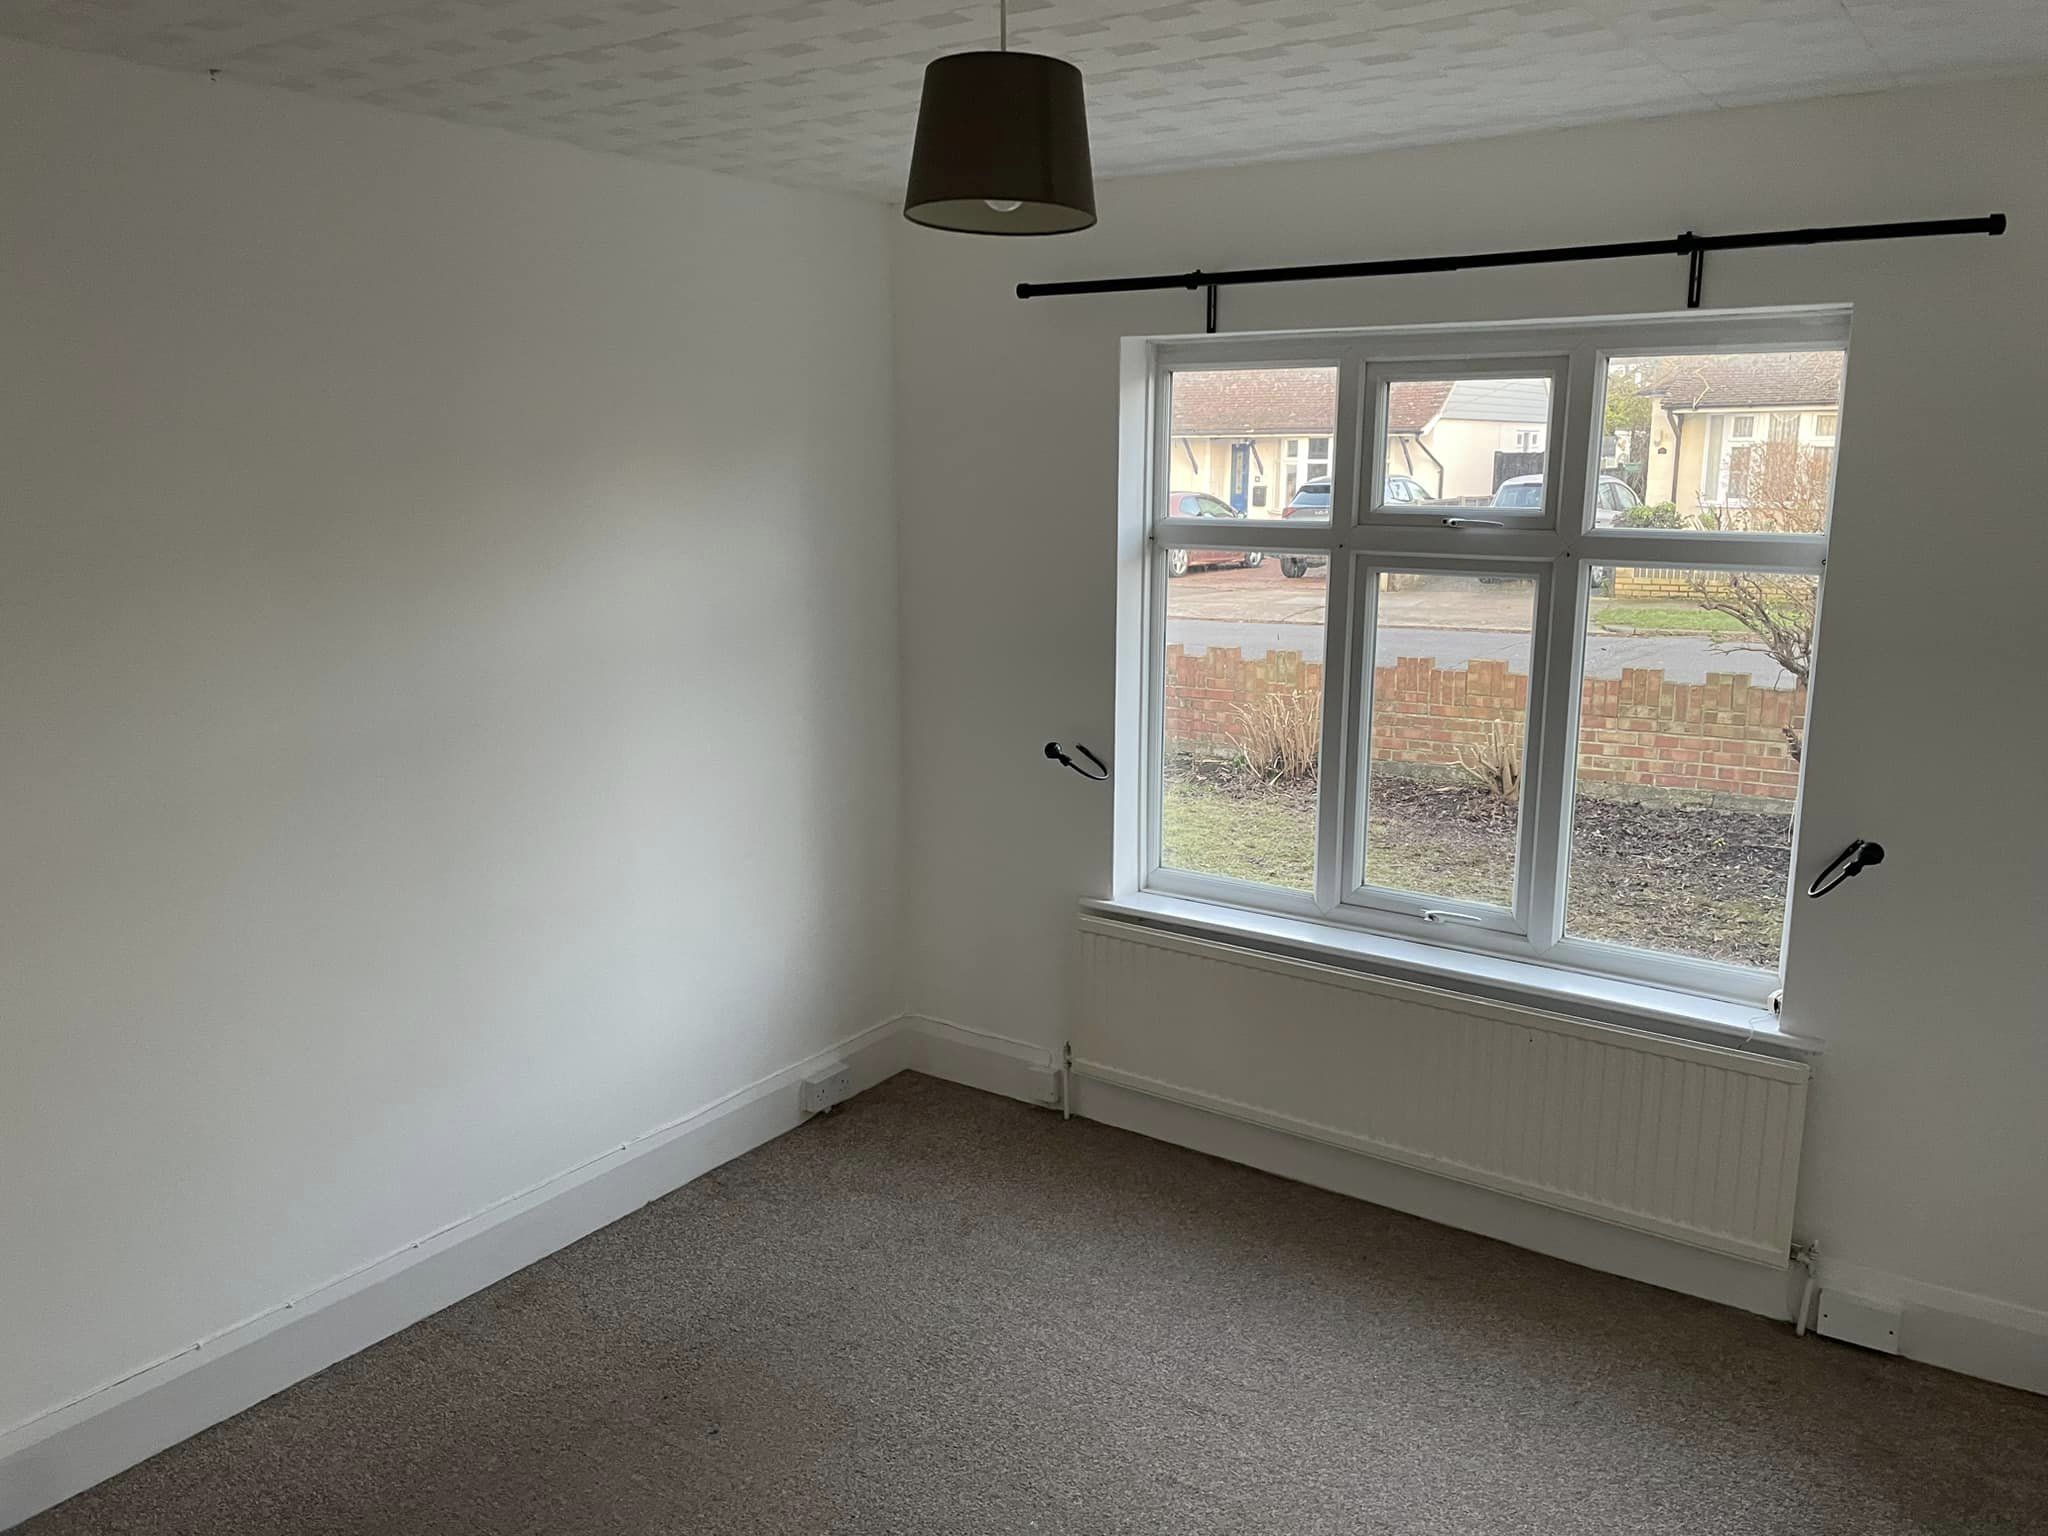 Fresh white paint on walls of small living room